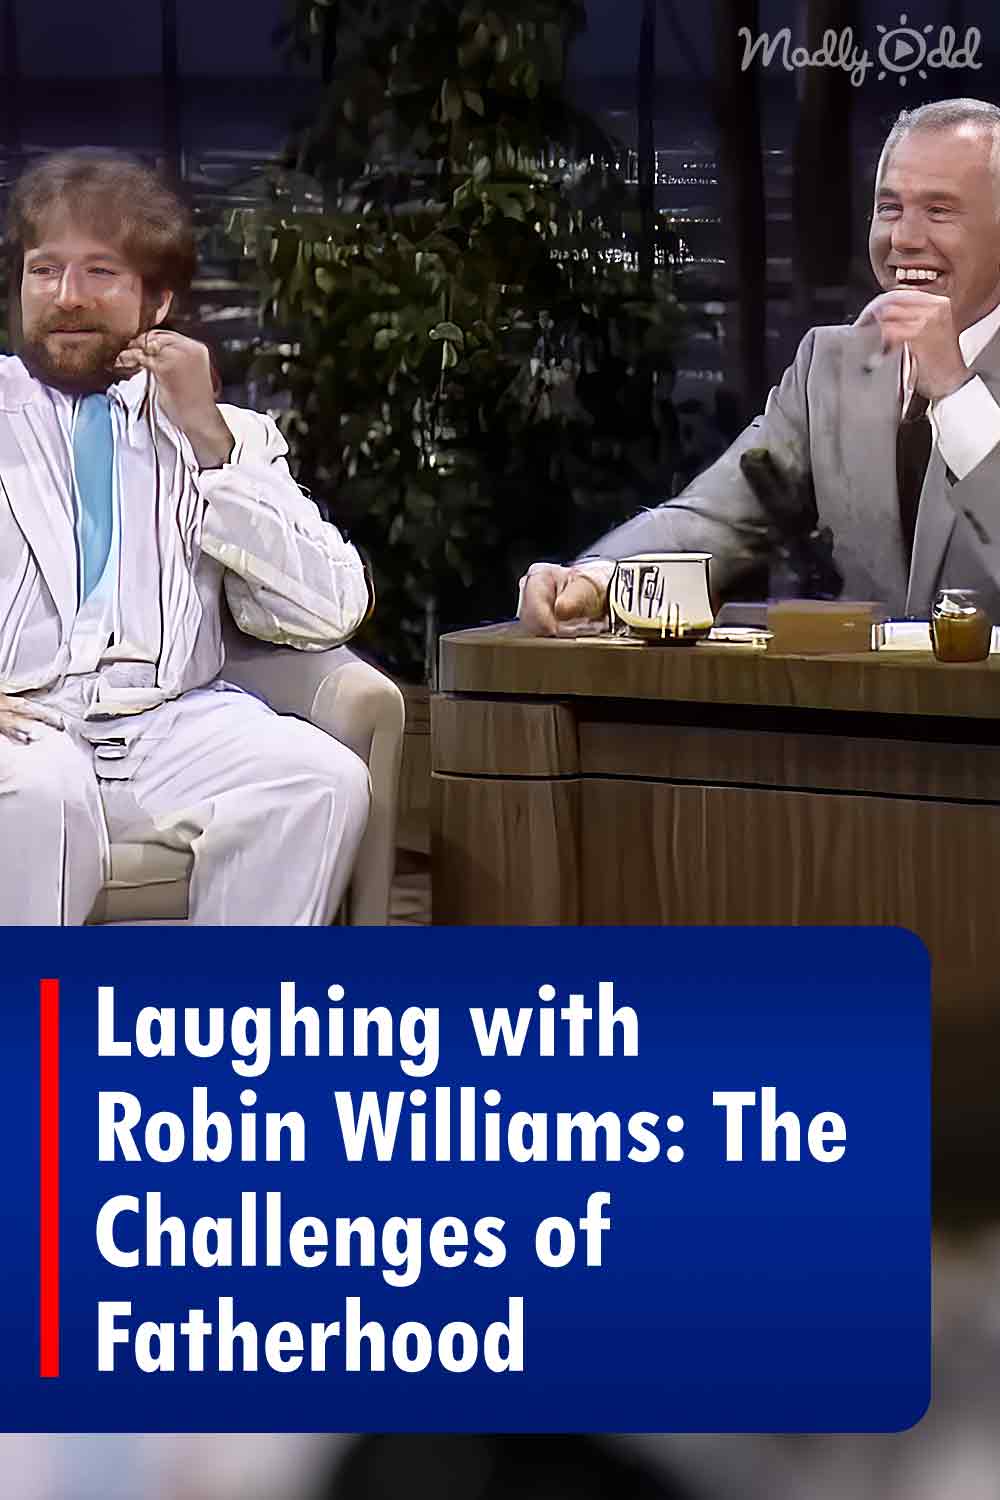 Laughing with Robin Williams: The Challenges of Fatherhood